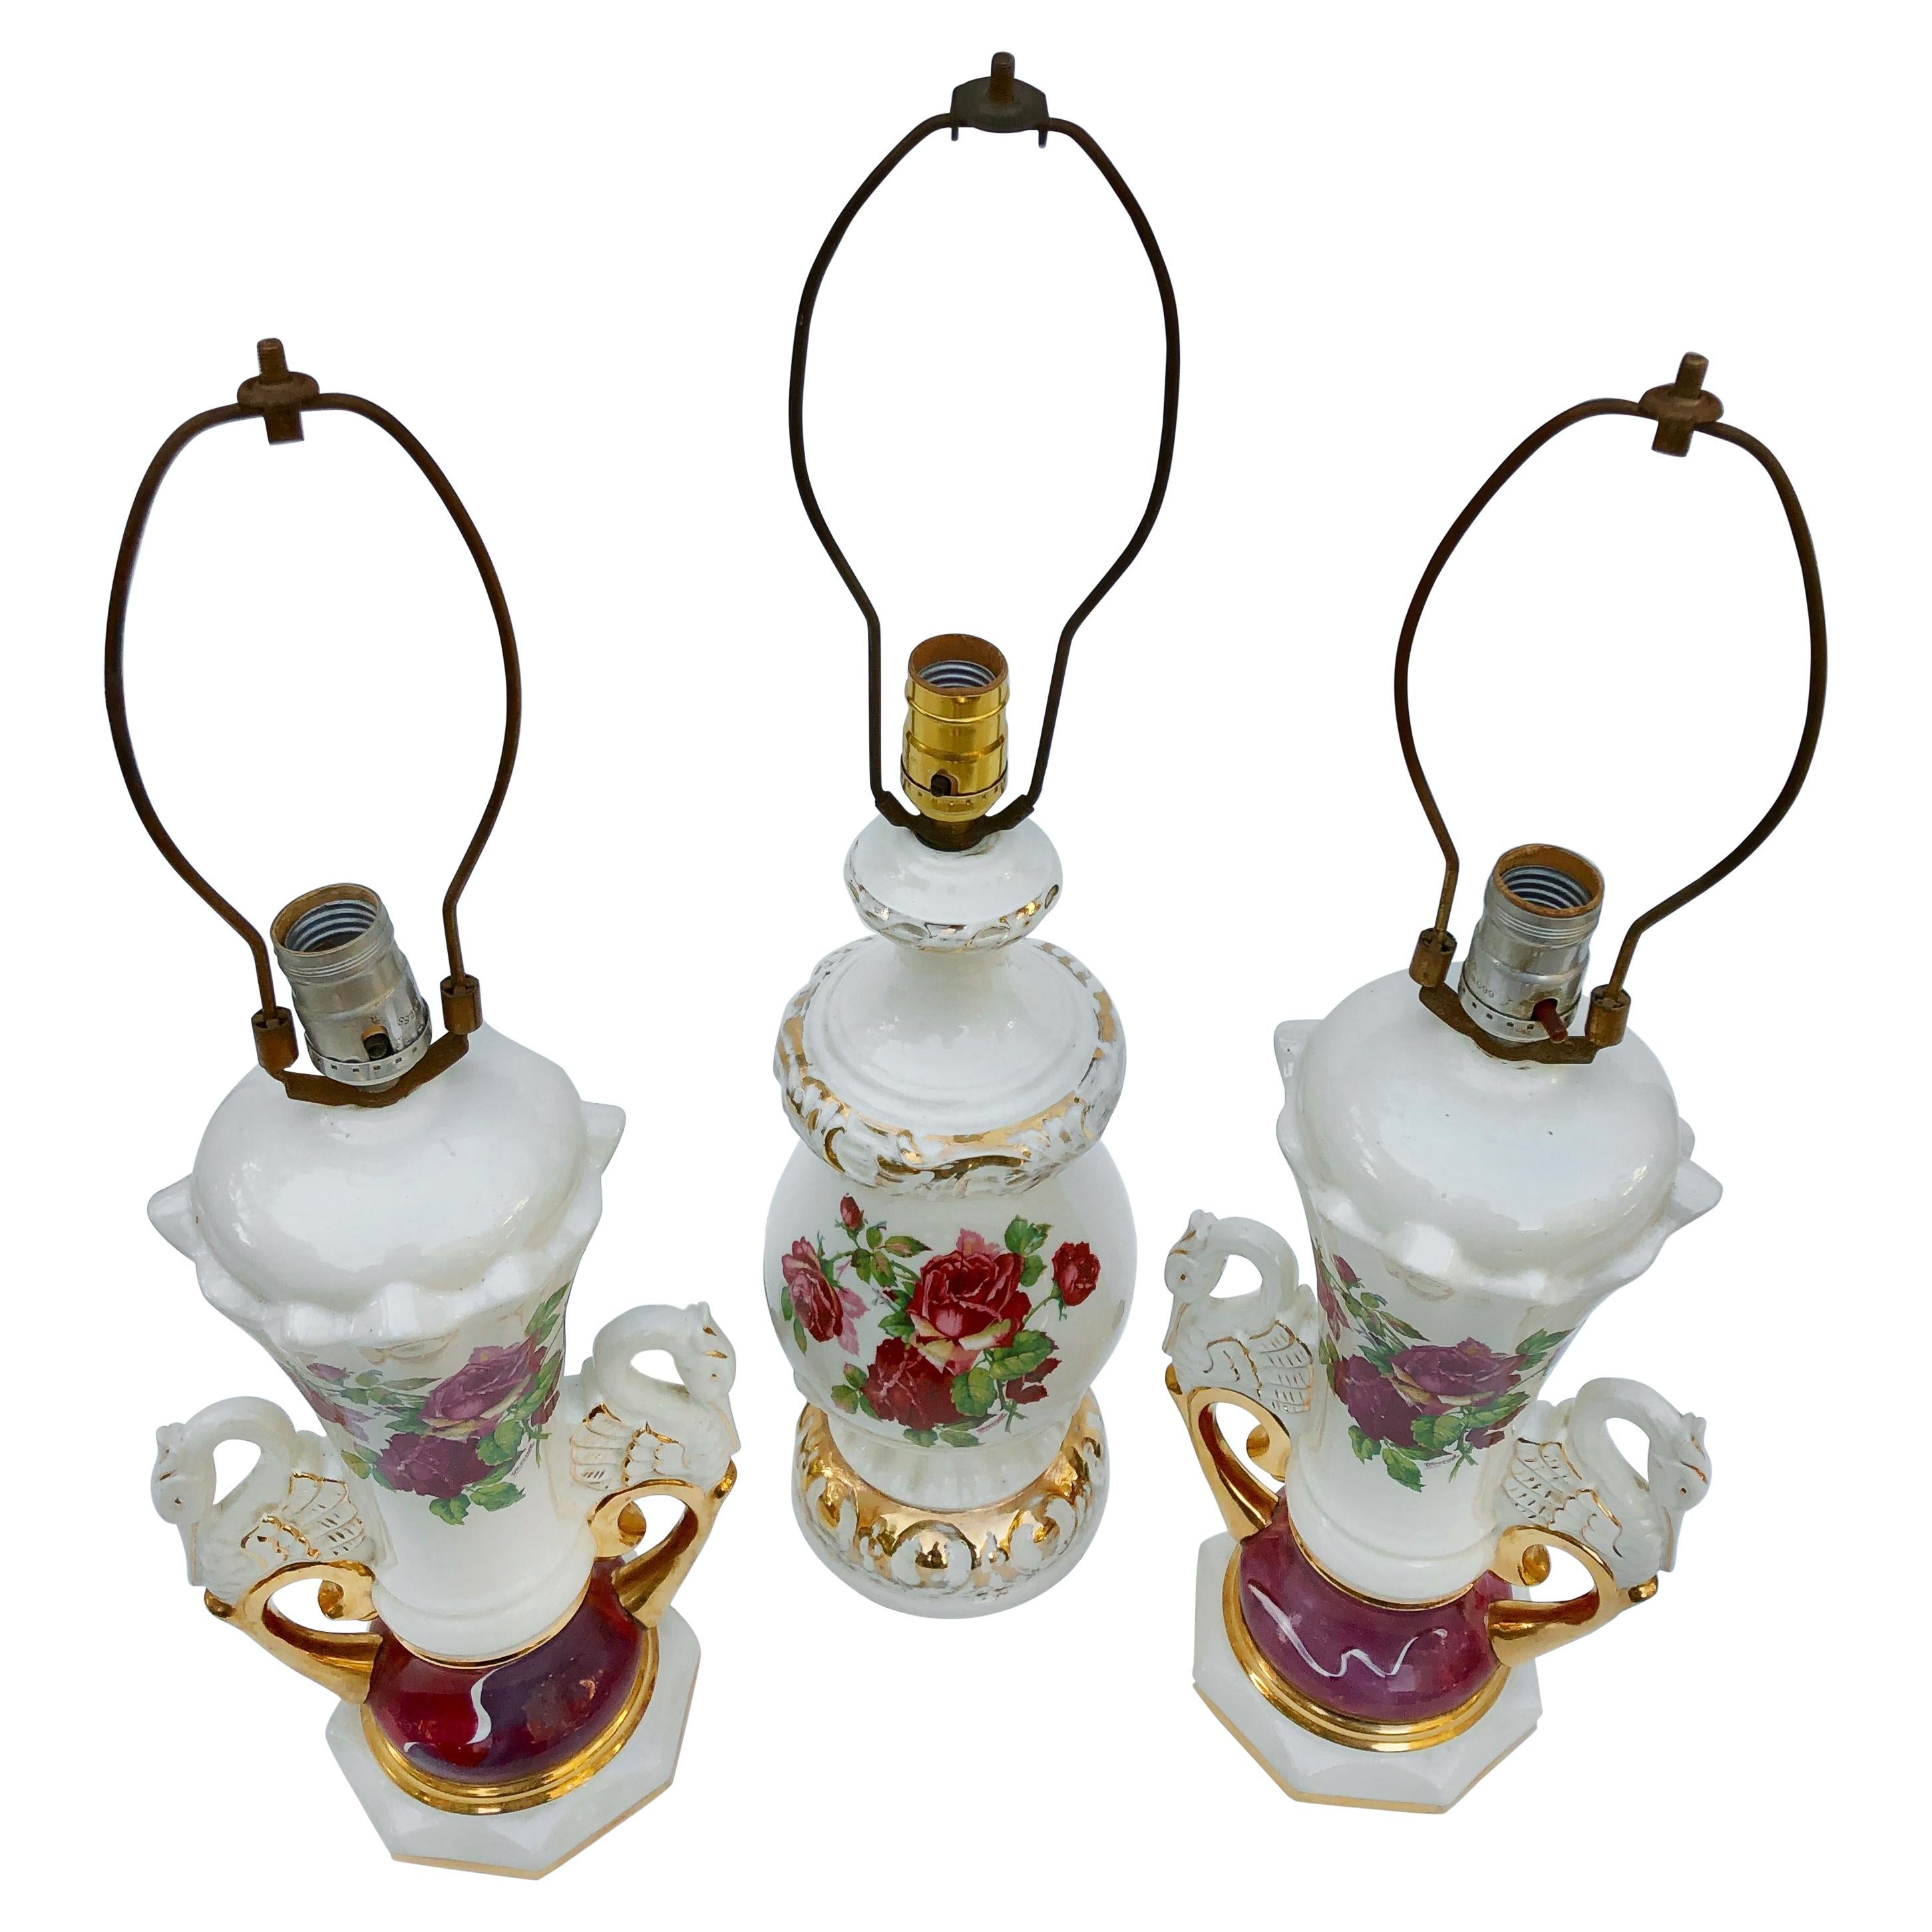 3 Jenny Worall Hand Painted Ceramic Table Lamps, 2 Are a Matched Set, Rose Motif For Sale